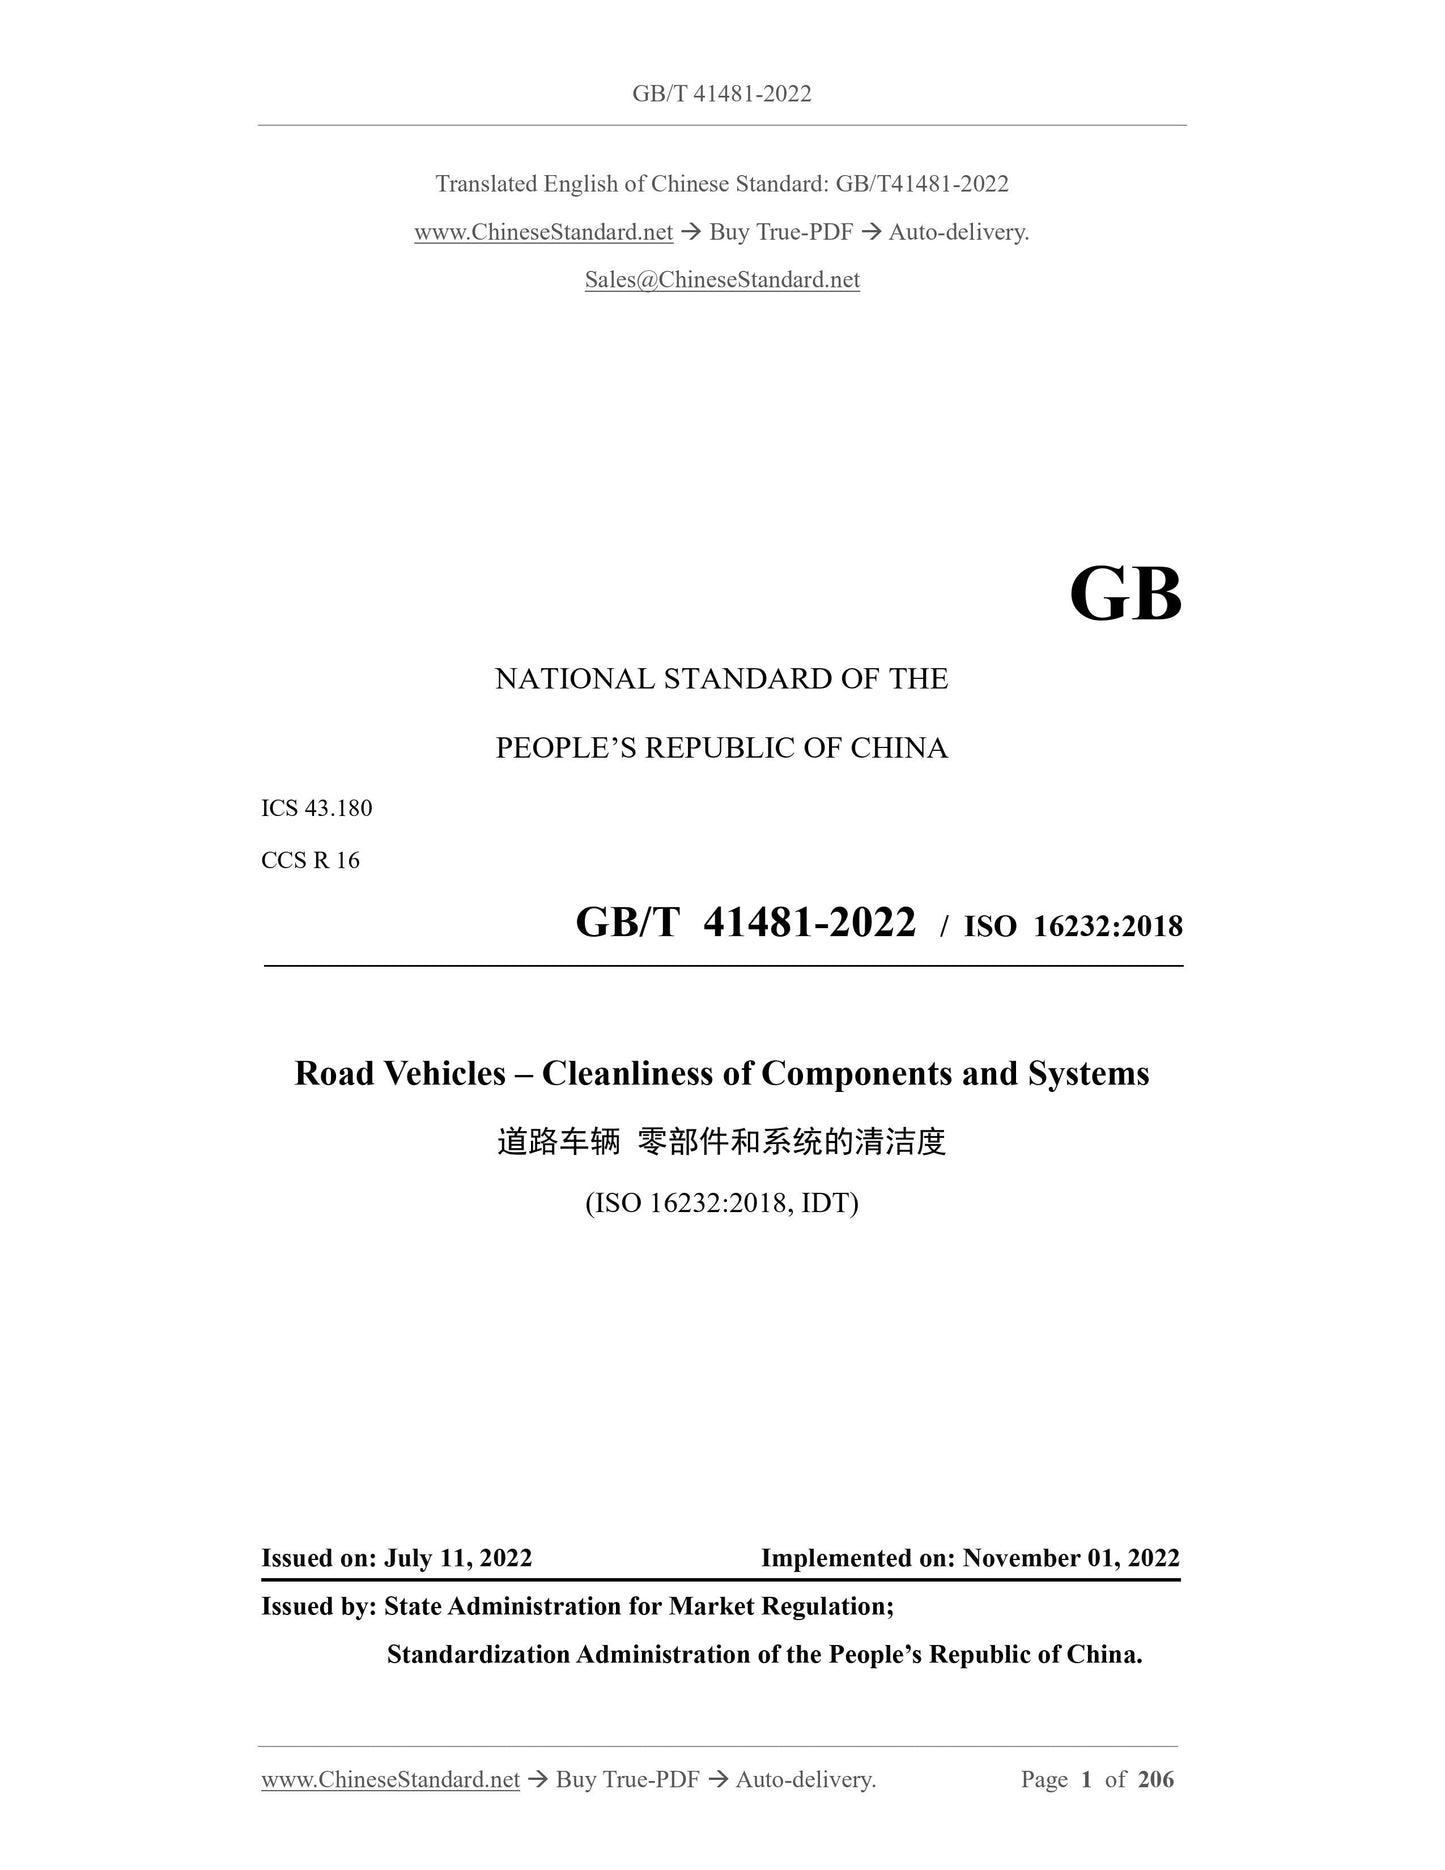 GB/T 41481-2022 Page 1